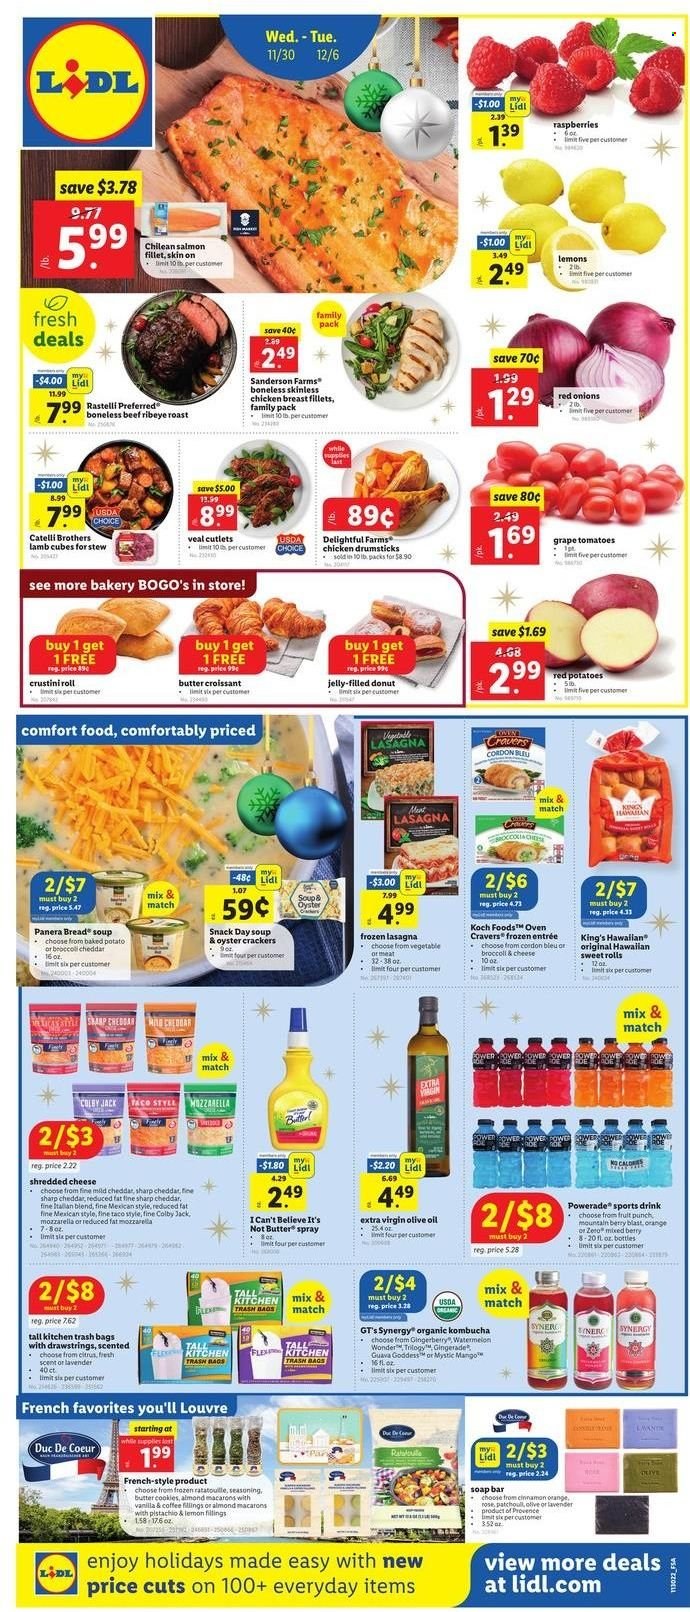 thumbnail - Lidl Flyer - 11/30/2022 - 12/06/2022 - Sales products - bread, croissant, donut, sweet rolls, broccoli, red onions, tomatoes, potatoes, red potatoes, guava, watermelon, oranges, salmon, salmon fillet, oysters, soup, lasagna meal, Colby cheese, mild cheddar, mozzarella, shredded cheese, I Can't Believe It's Not Butter, cordon bleu, cookies, butter cookies, snack, jelly, crackers, oyster crackers, spice, cinnamon, extra virgin olive oil, olive oil, oil, Powerade, fruit punch, kombucha, coffee, wine, rosé wine, chicken breasts, chicken drumsticks, veal cutlet, veal meat, soap bar, soap, trash bags, pan, rose. Page 1.